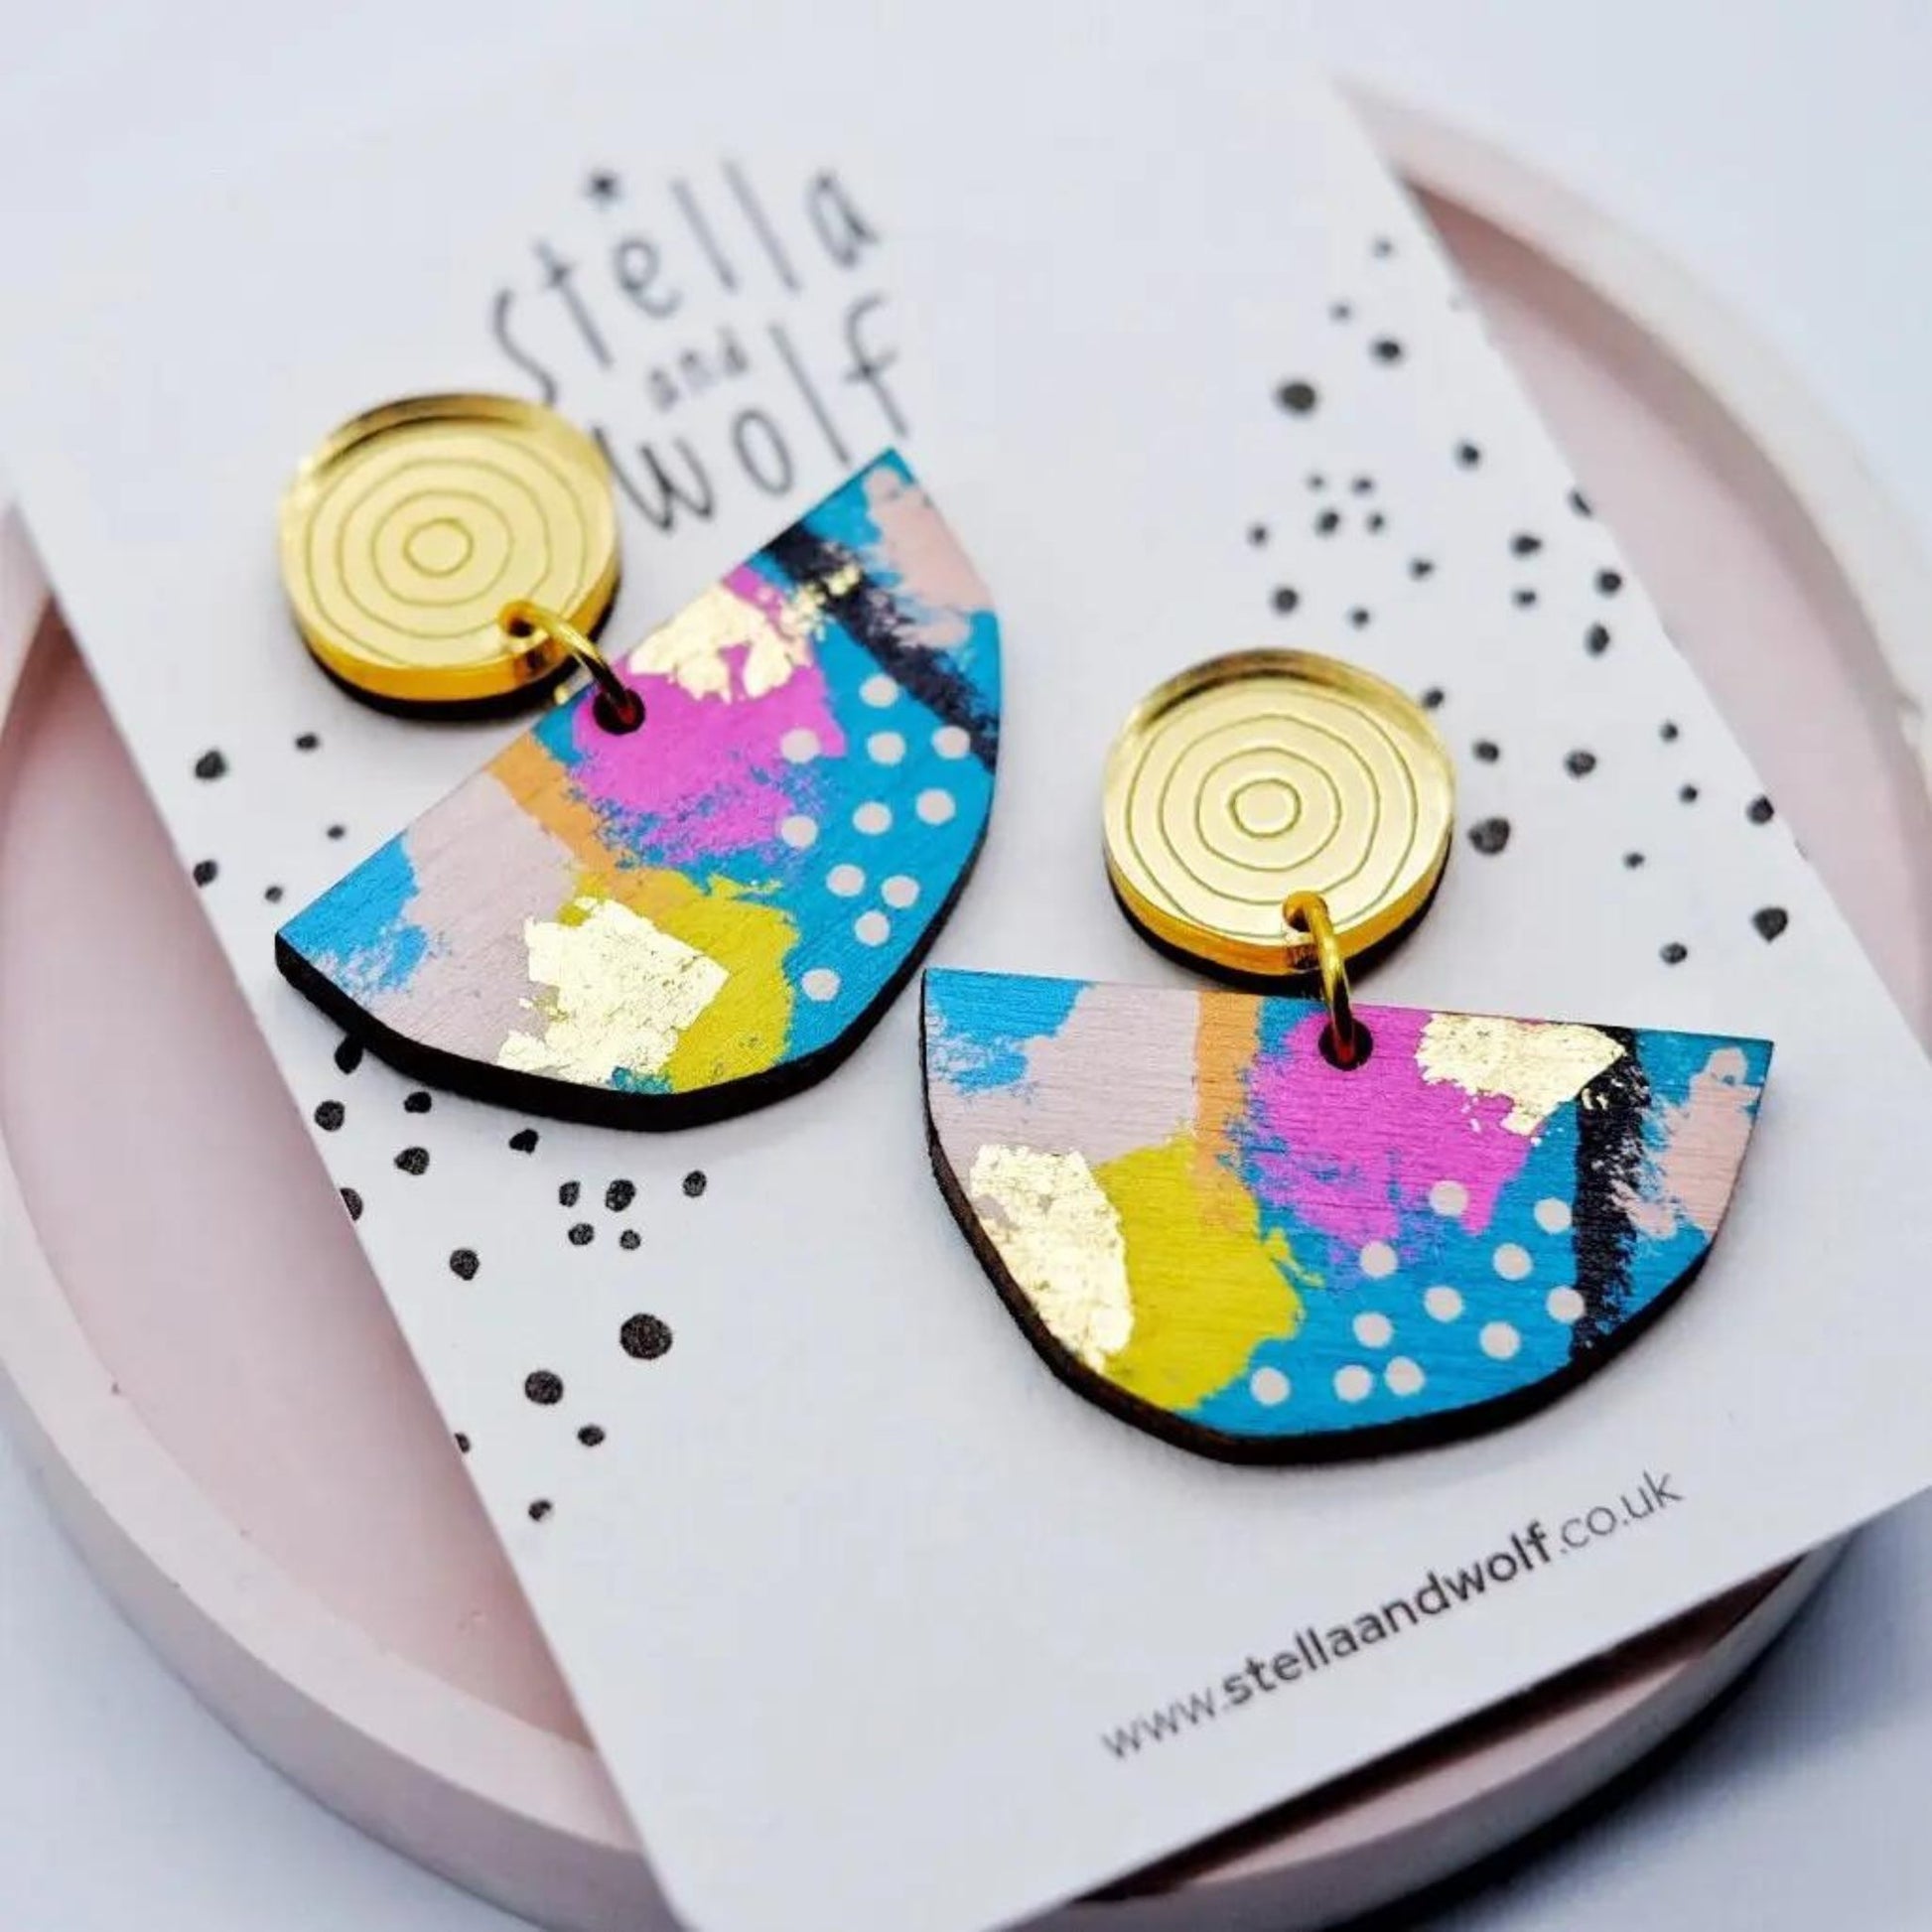 Big Bold Colourful Statement Earrings - The Little Jewellery Company